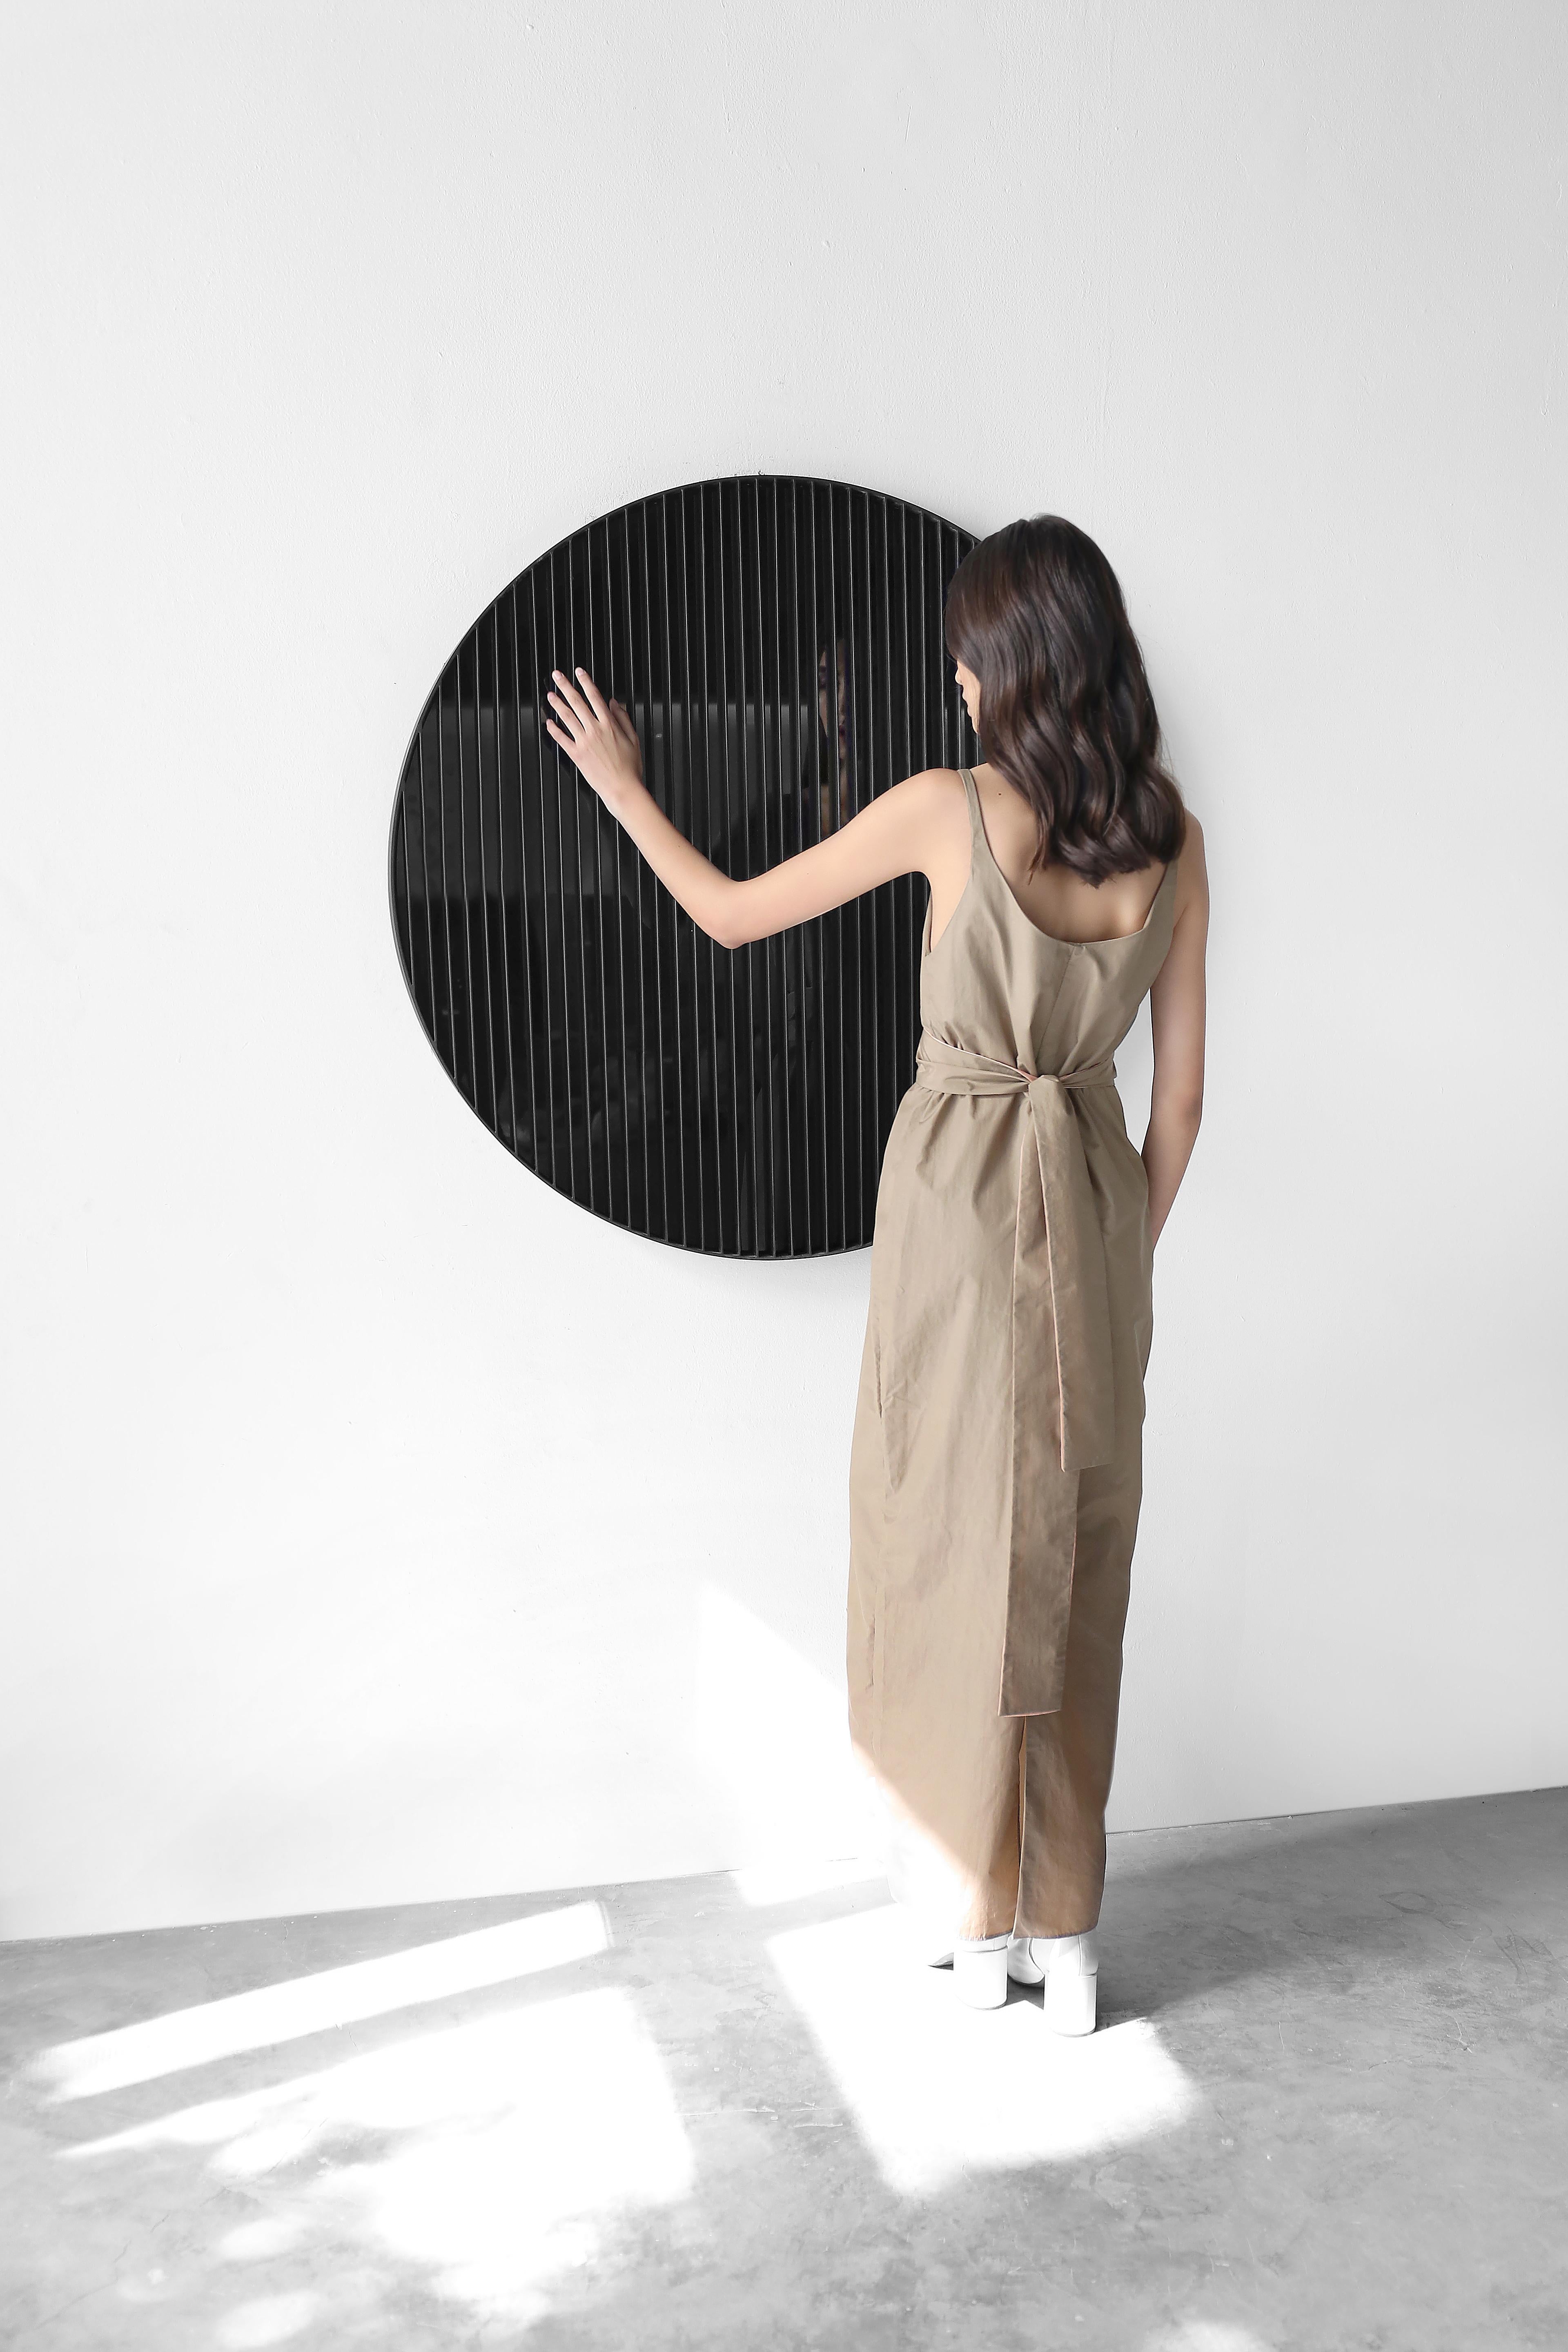 Laws of Motion Big Circular Decorative Mirror by Joel Escalona

Laws of Motion is a furniture collection that through a series of different typologies explores concepts like force, gravity and movement. Each of these functional sculptures designed